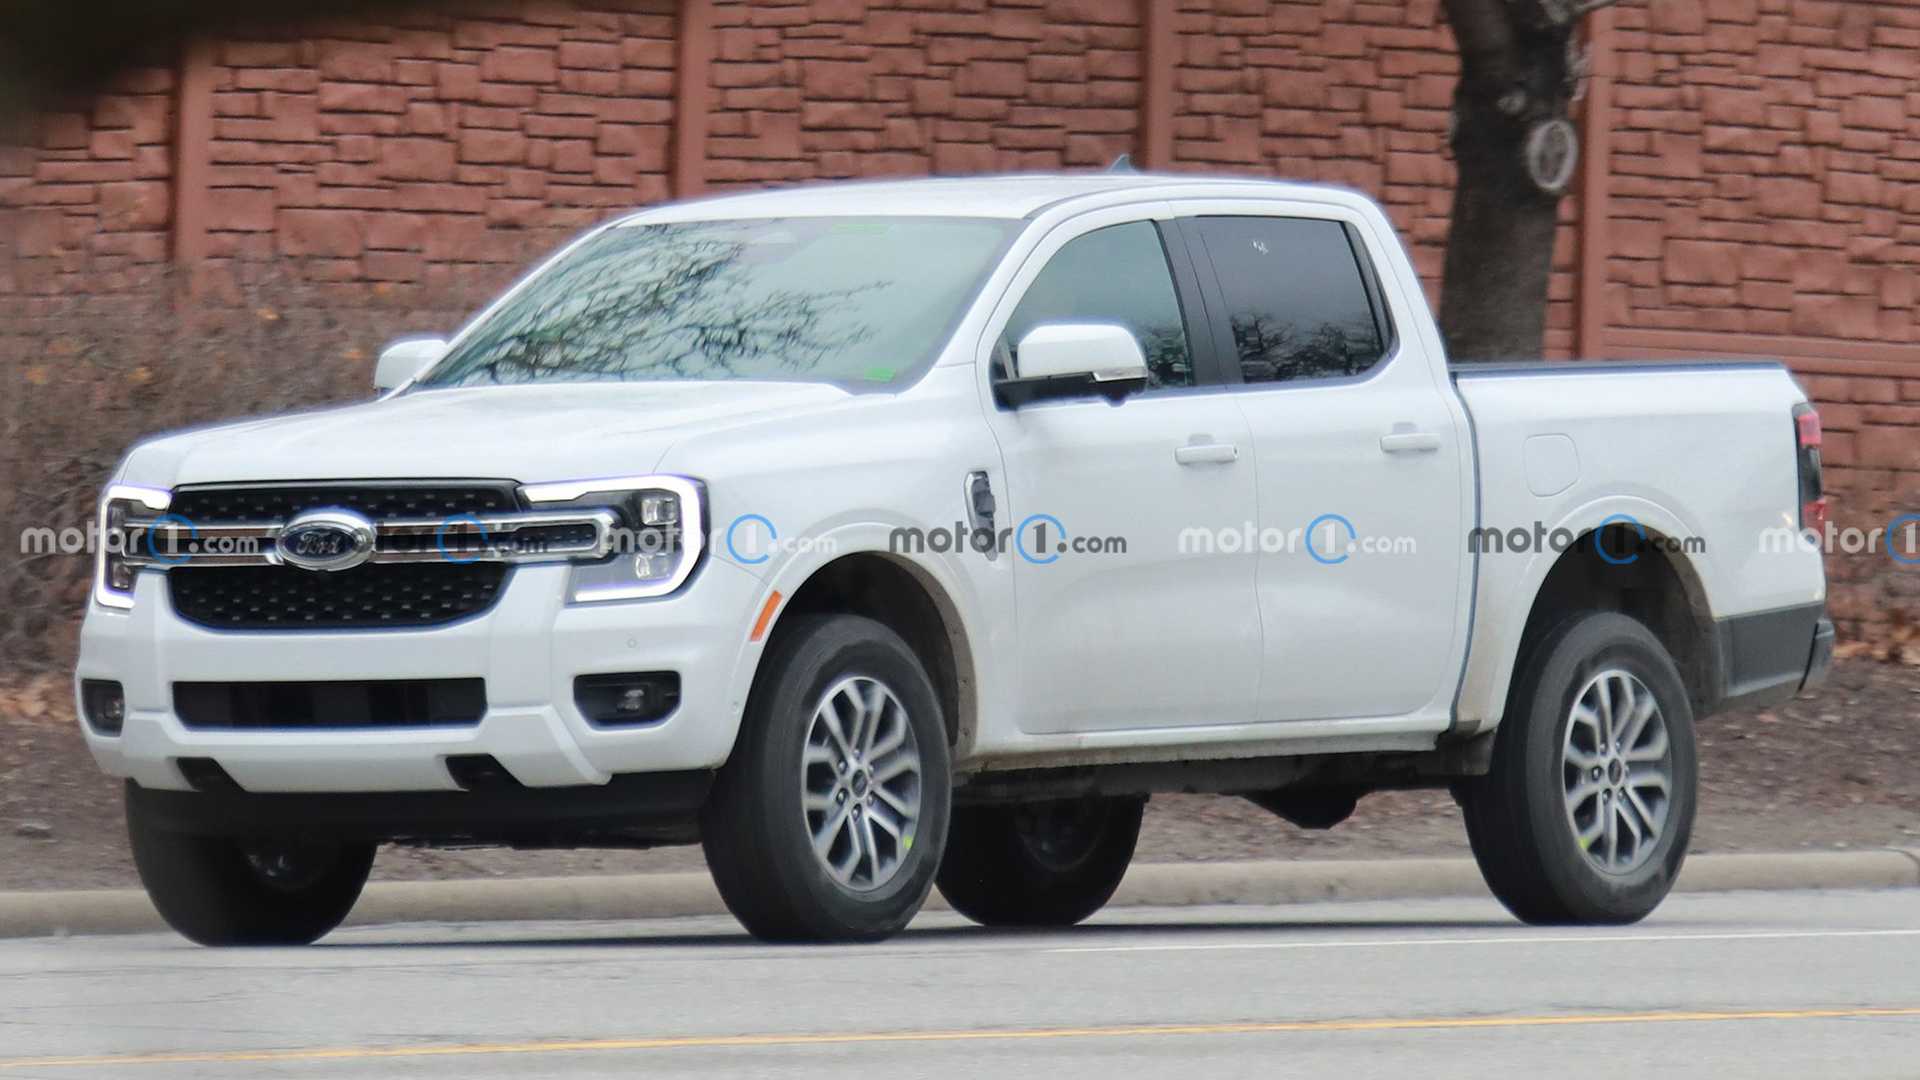 2024-ford-ranger-front-view-spy-photo.jpg